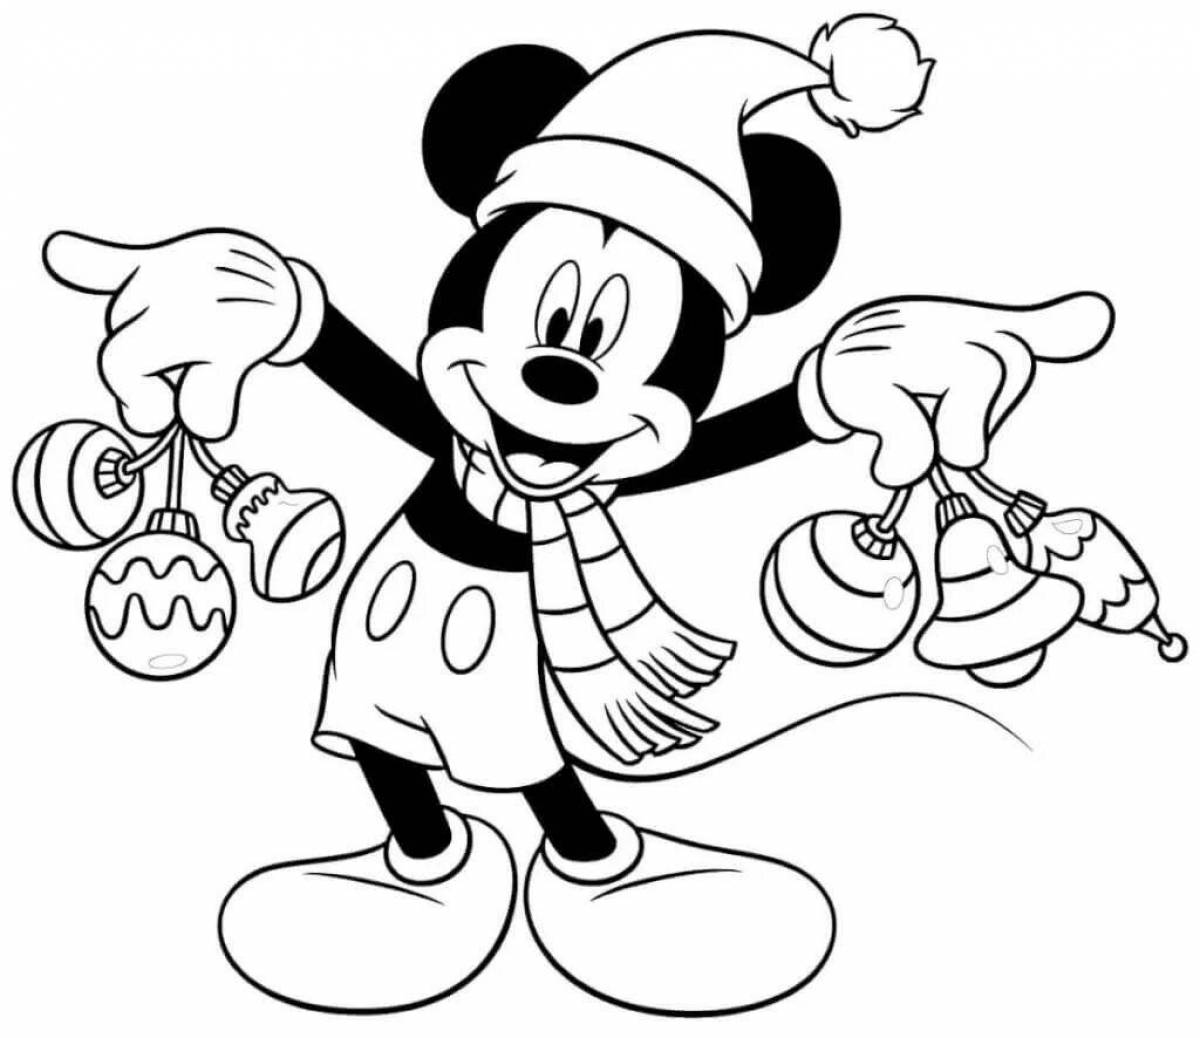 Amazing Mickey Mouse Christmas coloring book